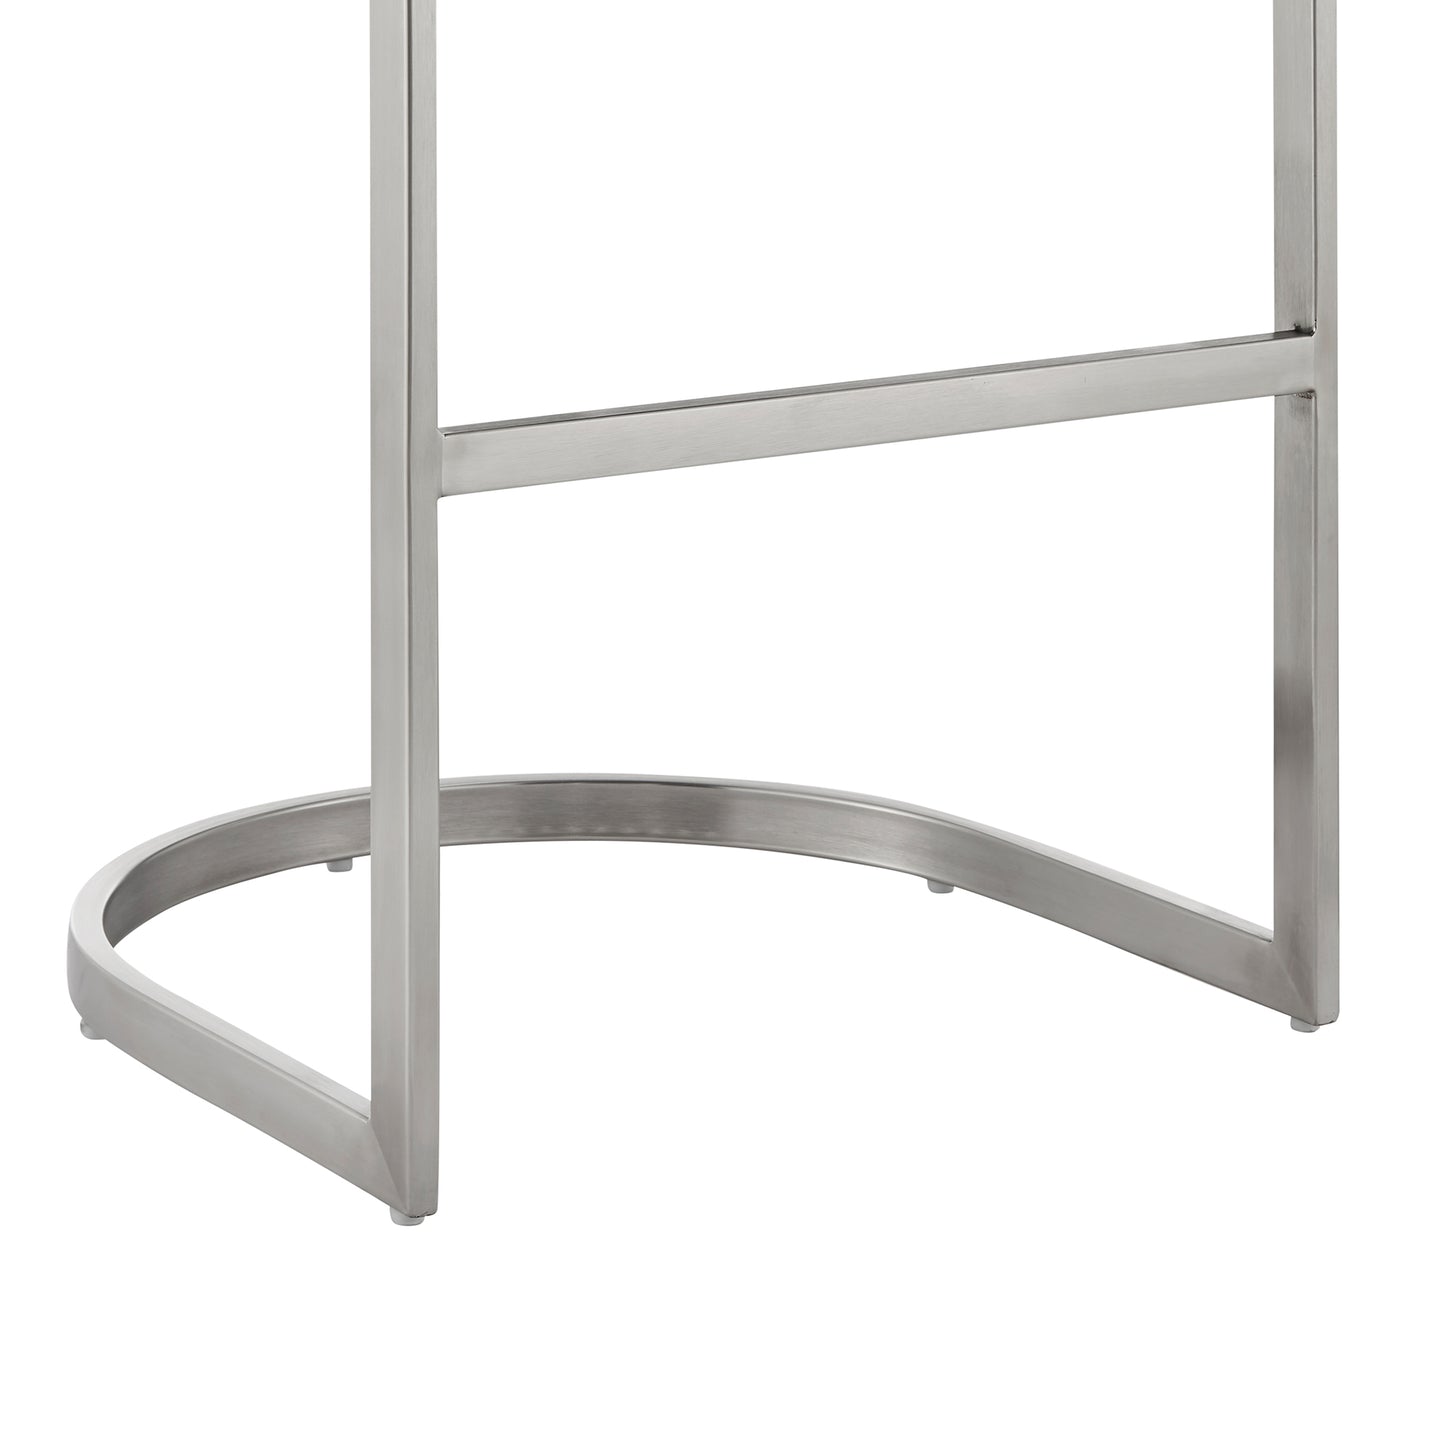 Katherine 30" Bar Stool in Brushed Stainless Steel with Gray Faux Leather